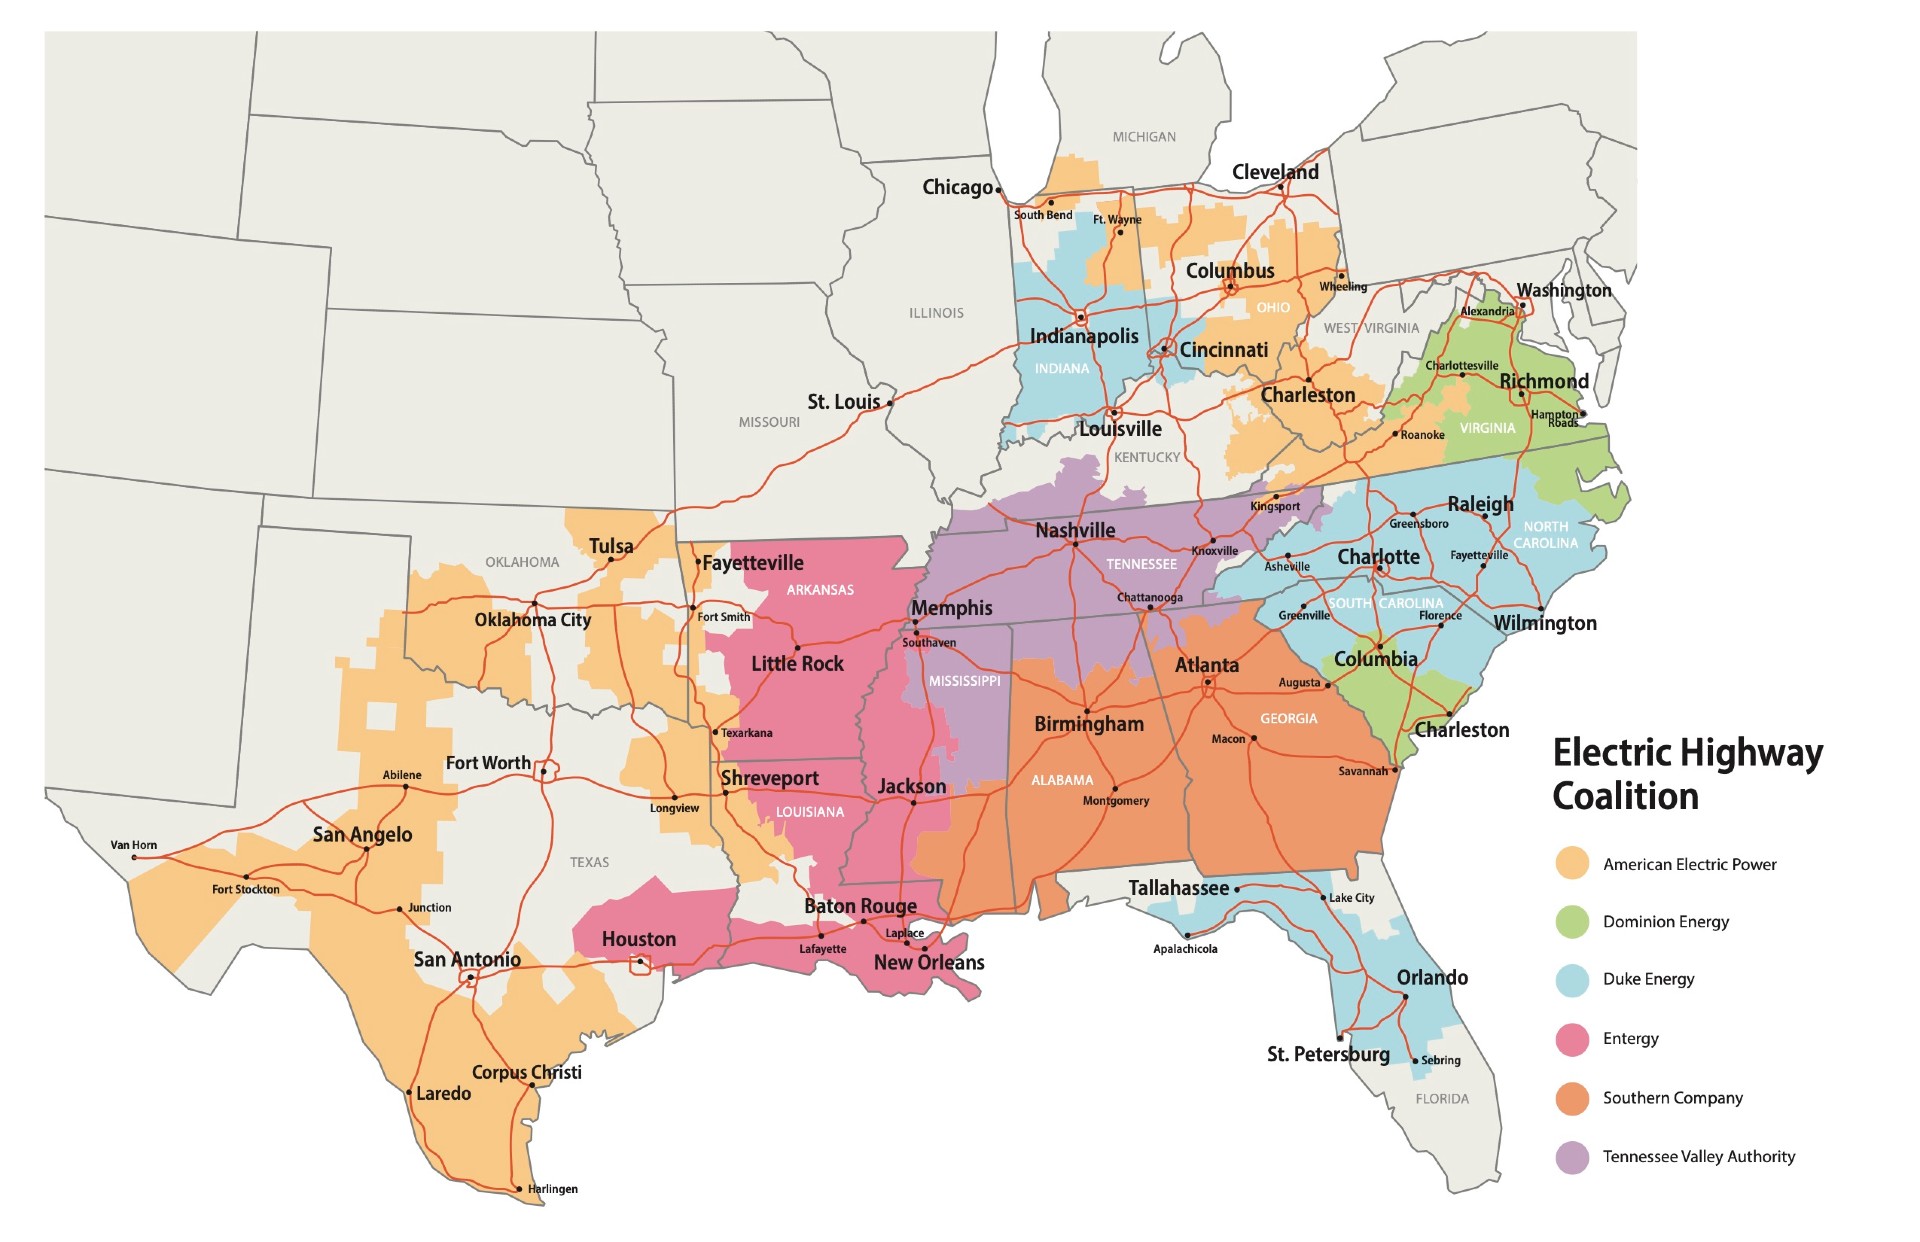 Six US utilities form Electric Highway Coalition in Southeast, Midwest